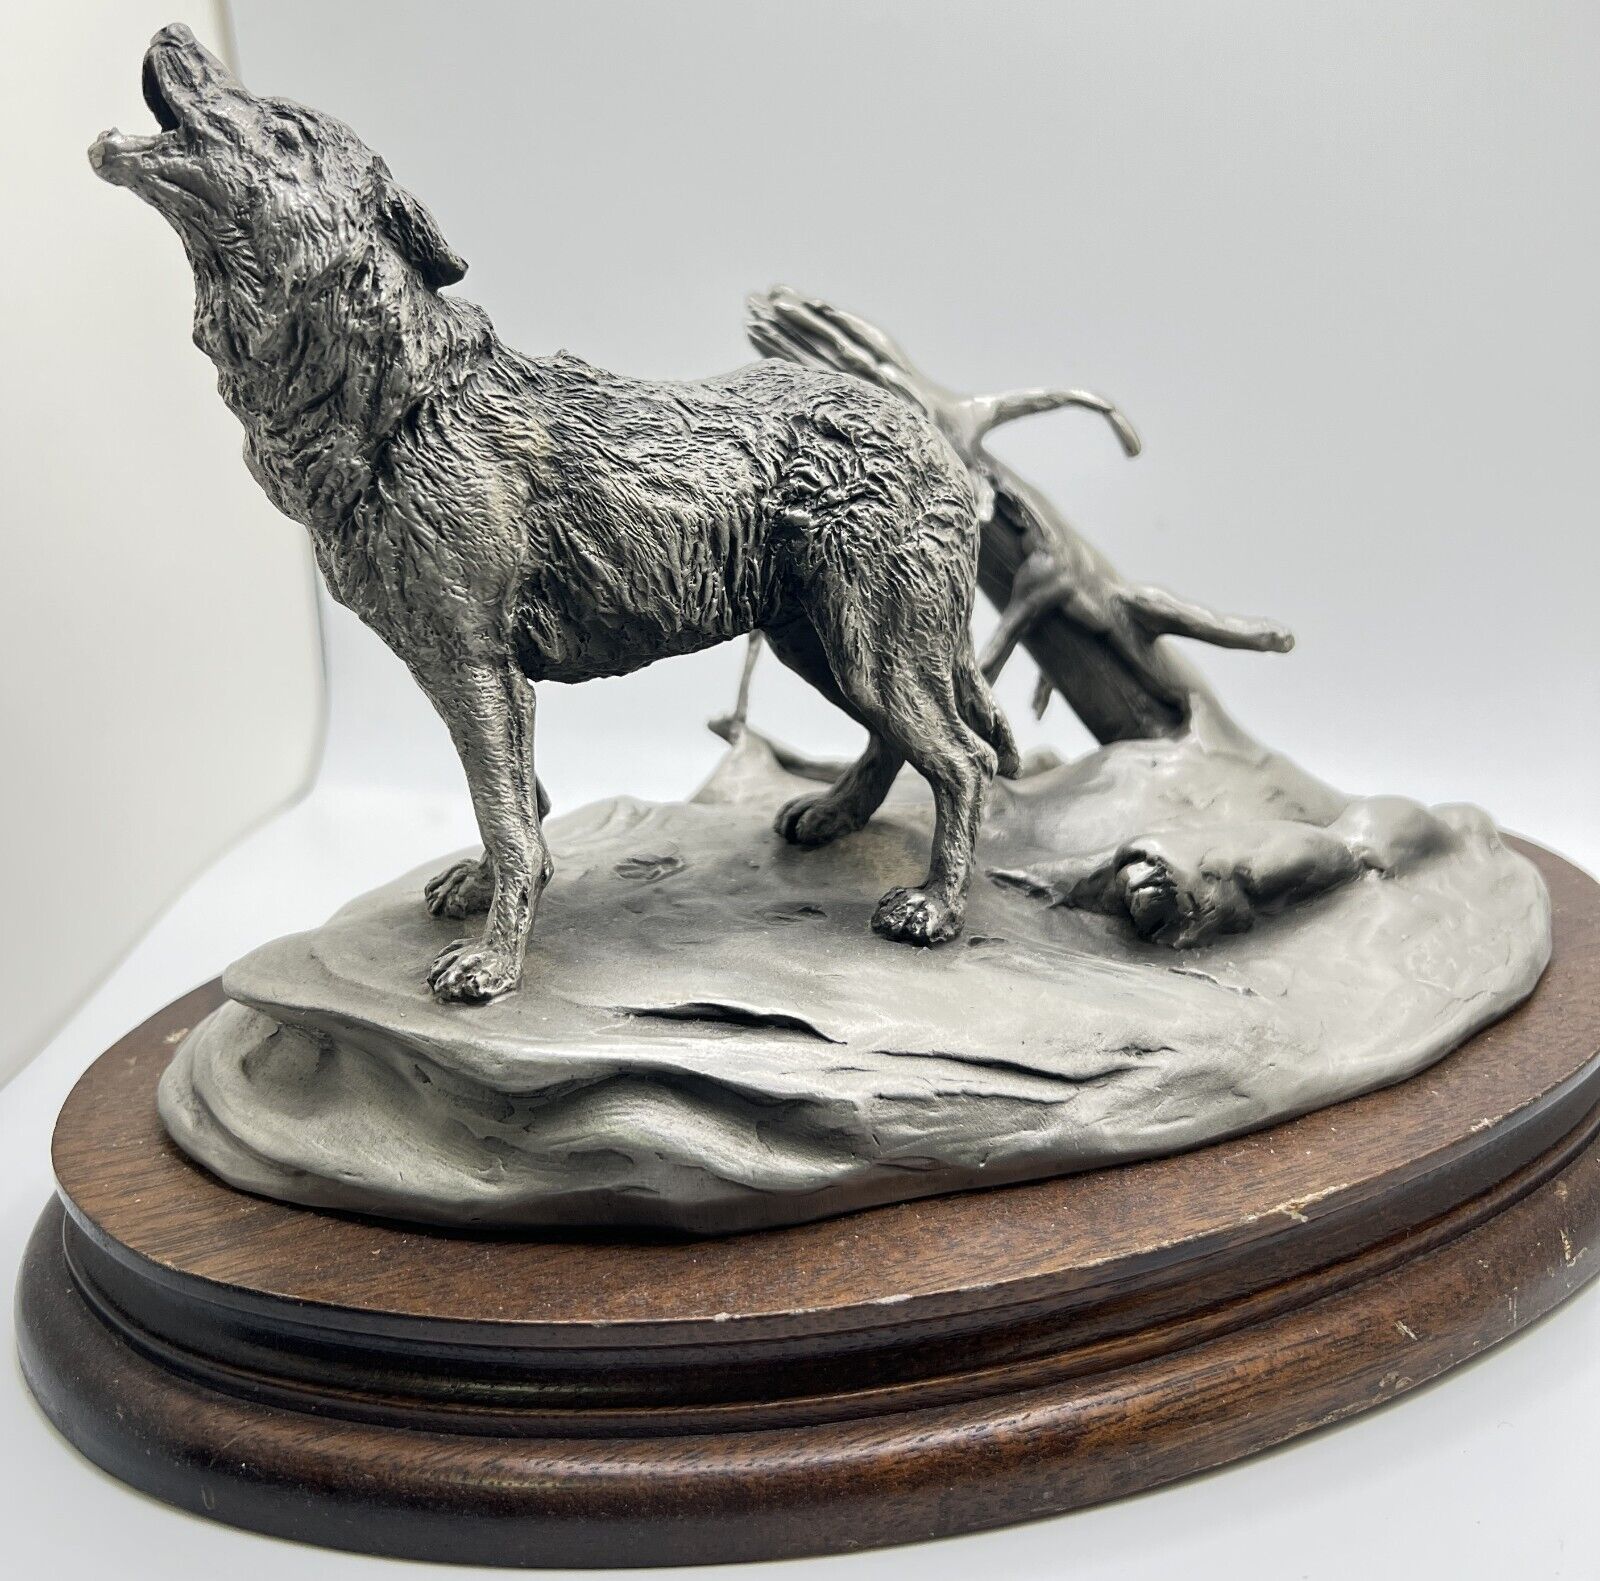 AUDUBON SOCIETY 75TH ANNIVERSARY PEWTER SCULPTURE TIMBER WOLF BY LOATES 79 13CG